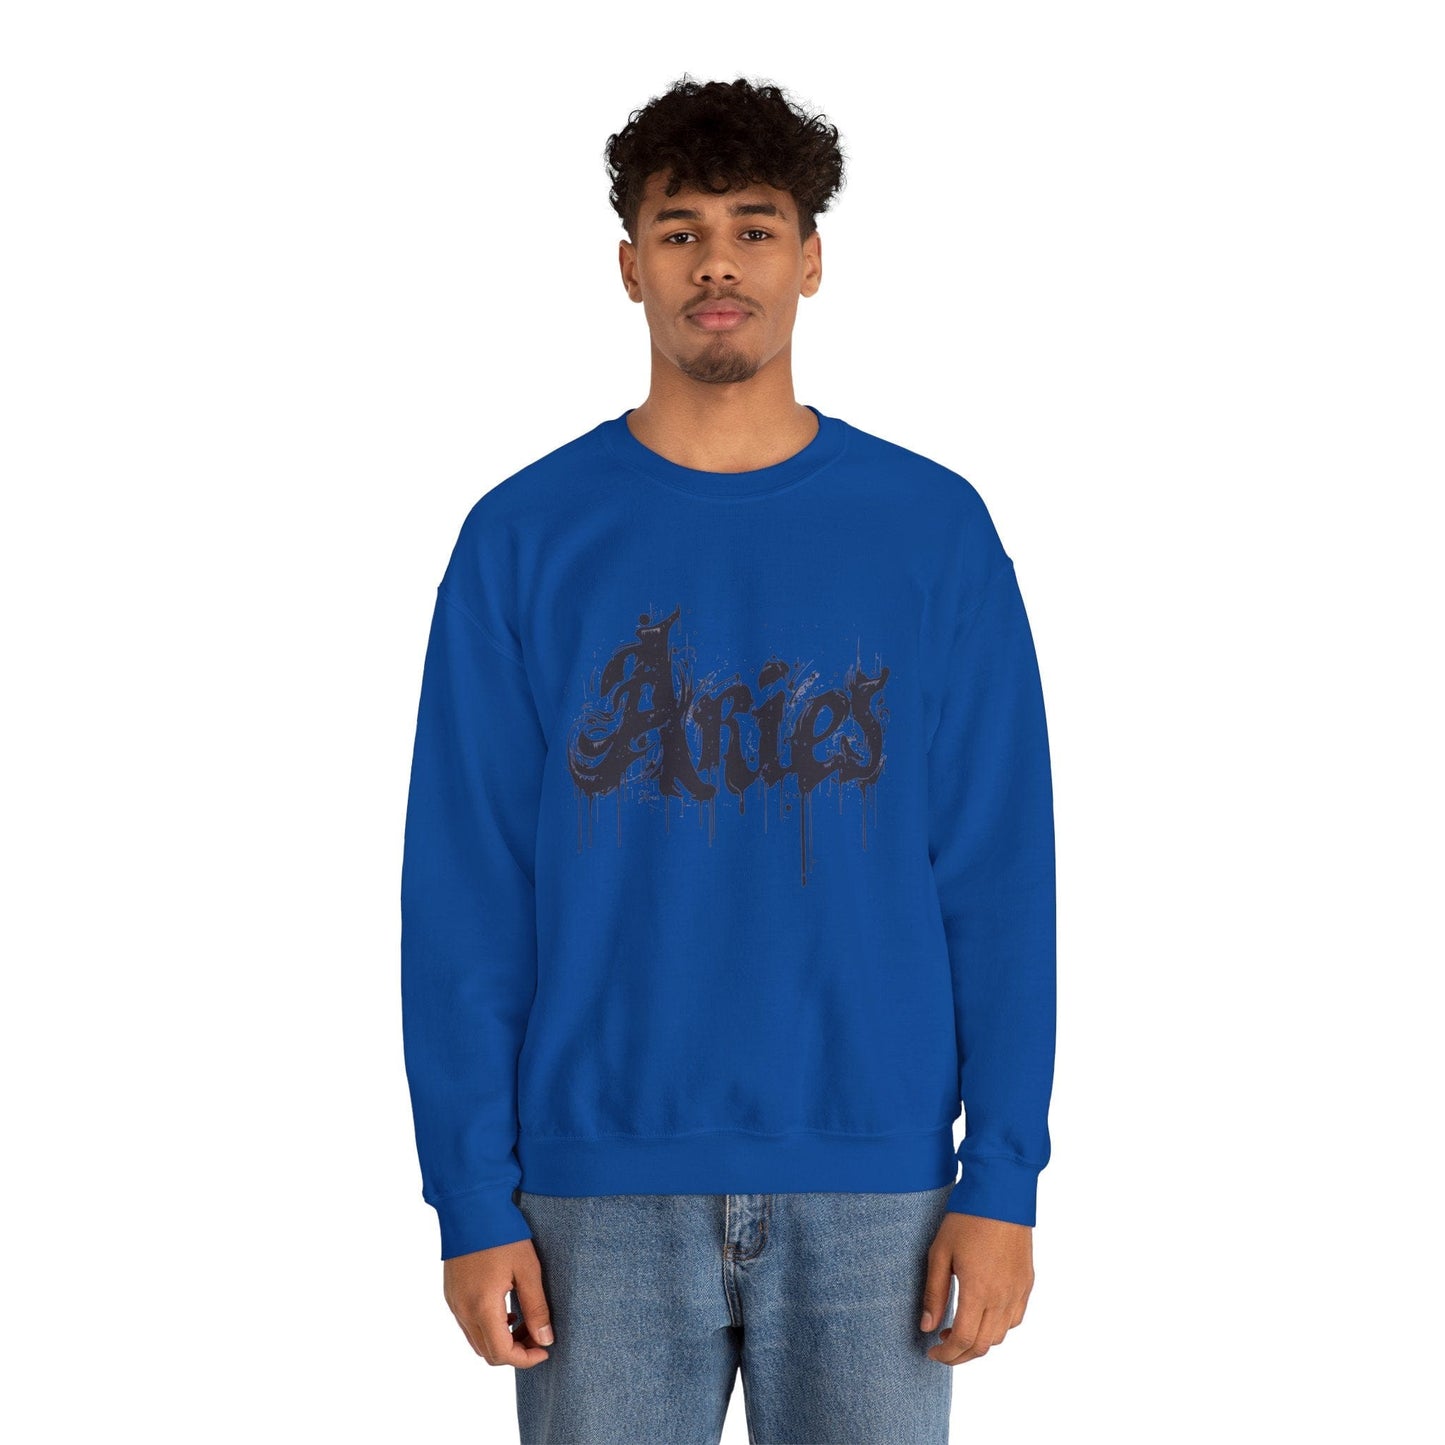 Sweatshirt Ink-Dripped Aries Energy Soft Sweater: Embrace Your Fire